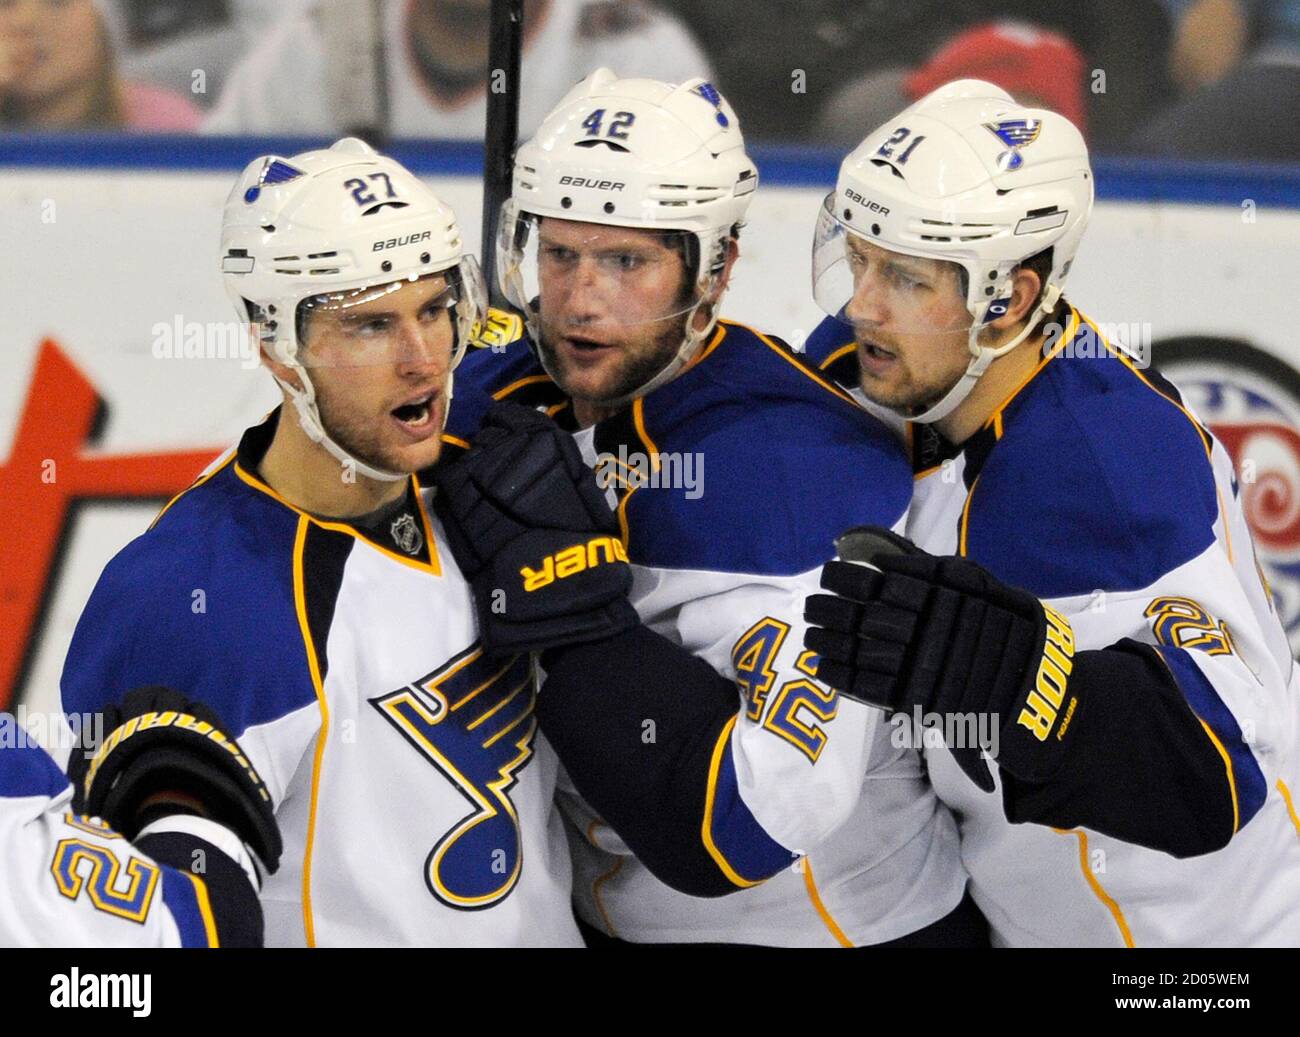 Pietrangelo High Resolution Stock Photography and Images - Alamy